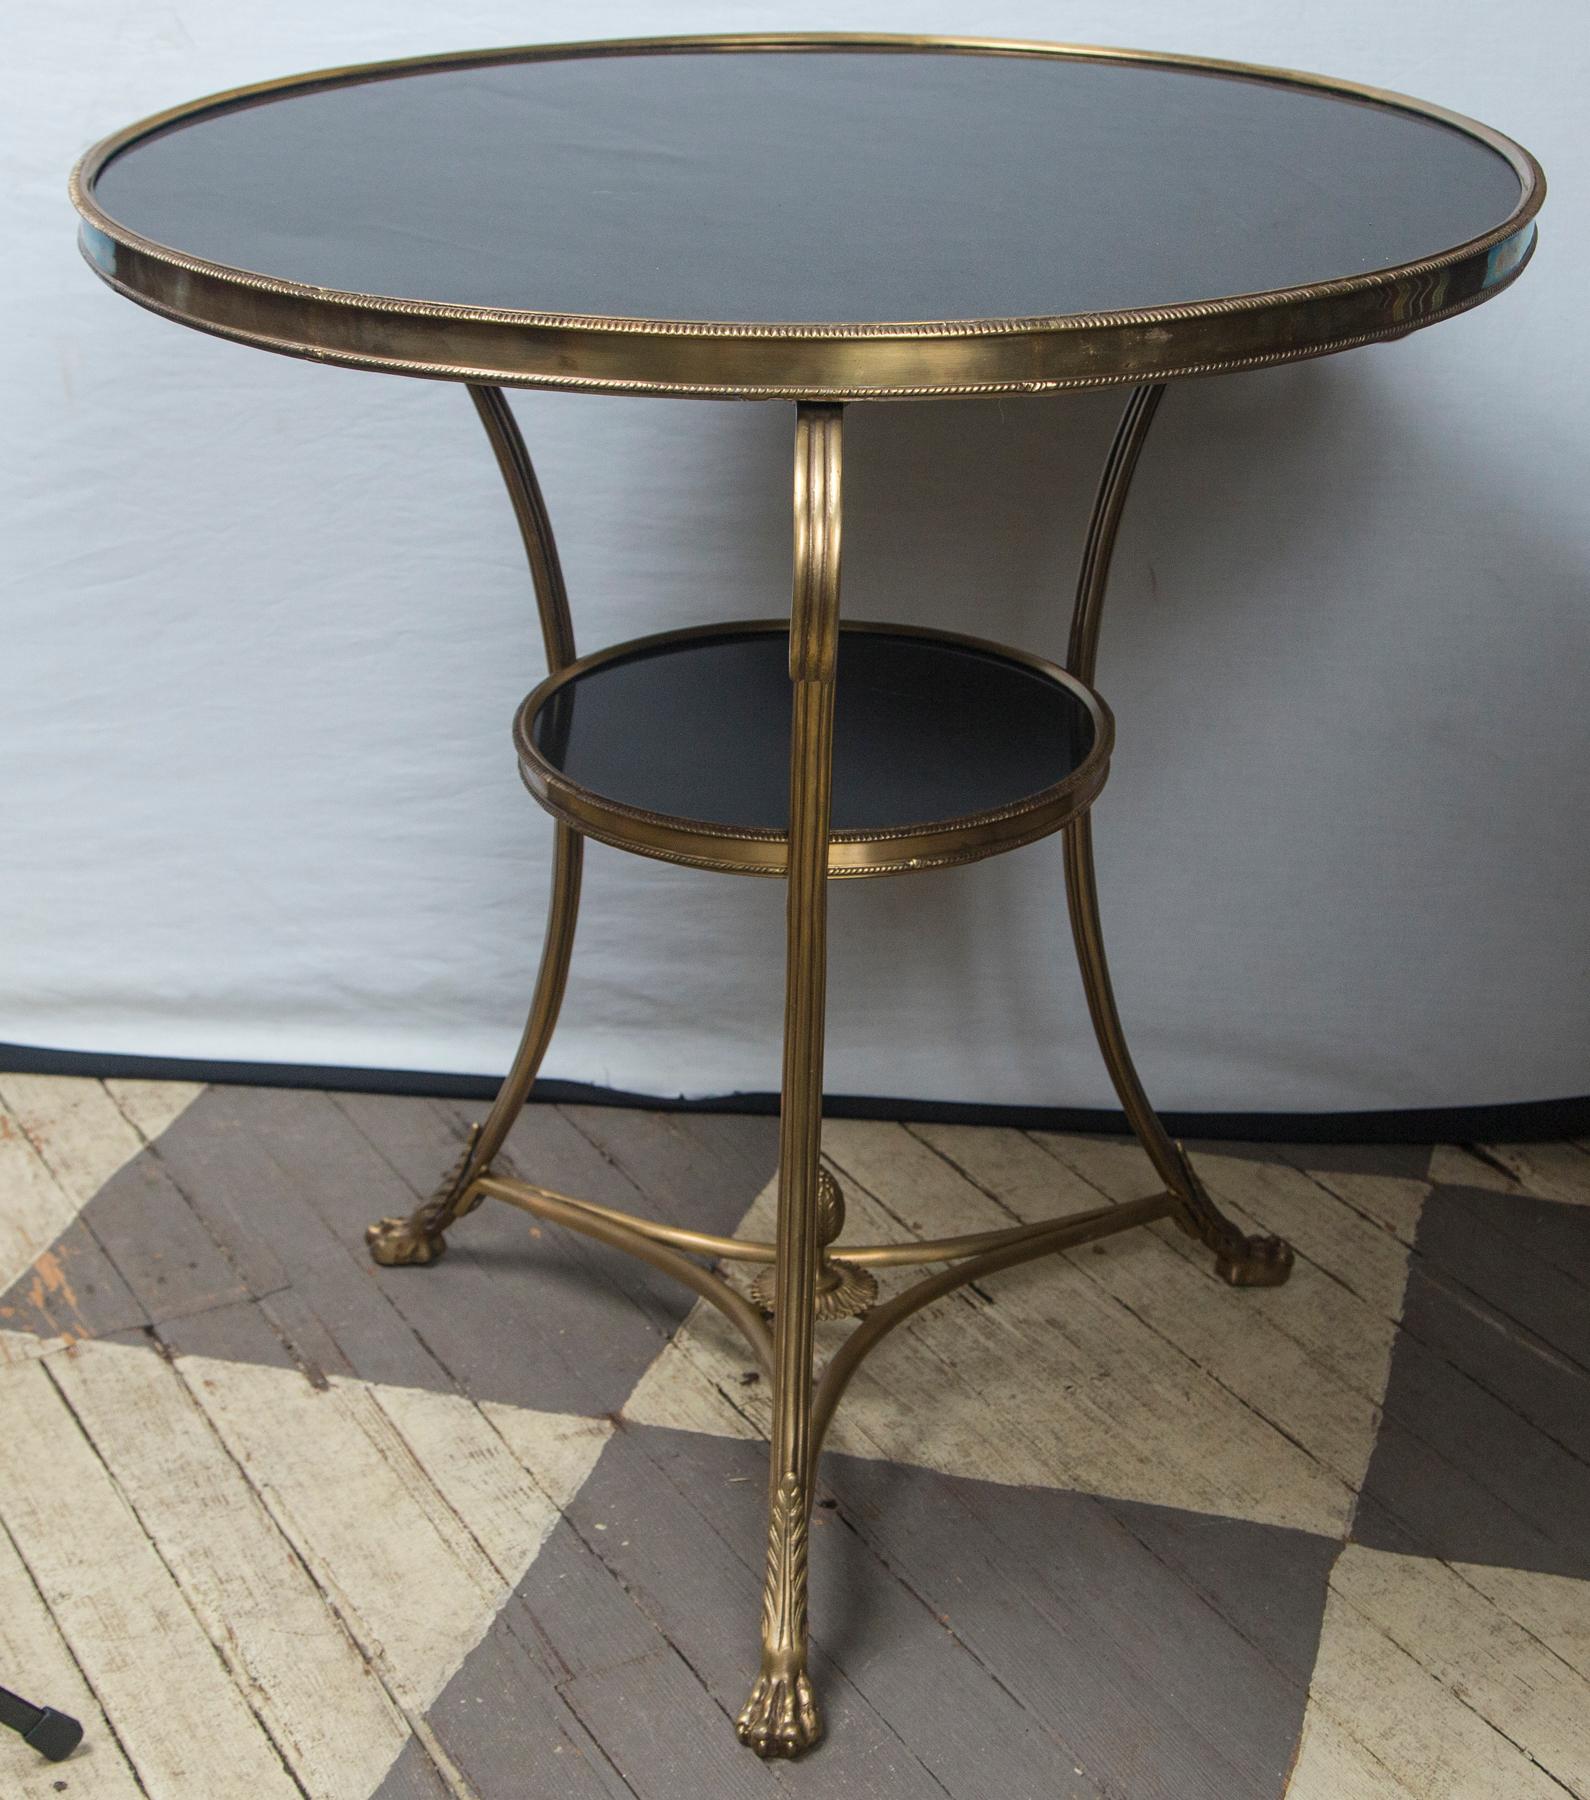 Made of solid brass with a black marble top and lower marble round, this table is in the Directoire style.
Gadrooned edge, dramatic scrolling legs, tripartite stretcher topped by an acorn finial. Casters missing
Lower shelf has a 12 inch diameter.